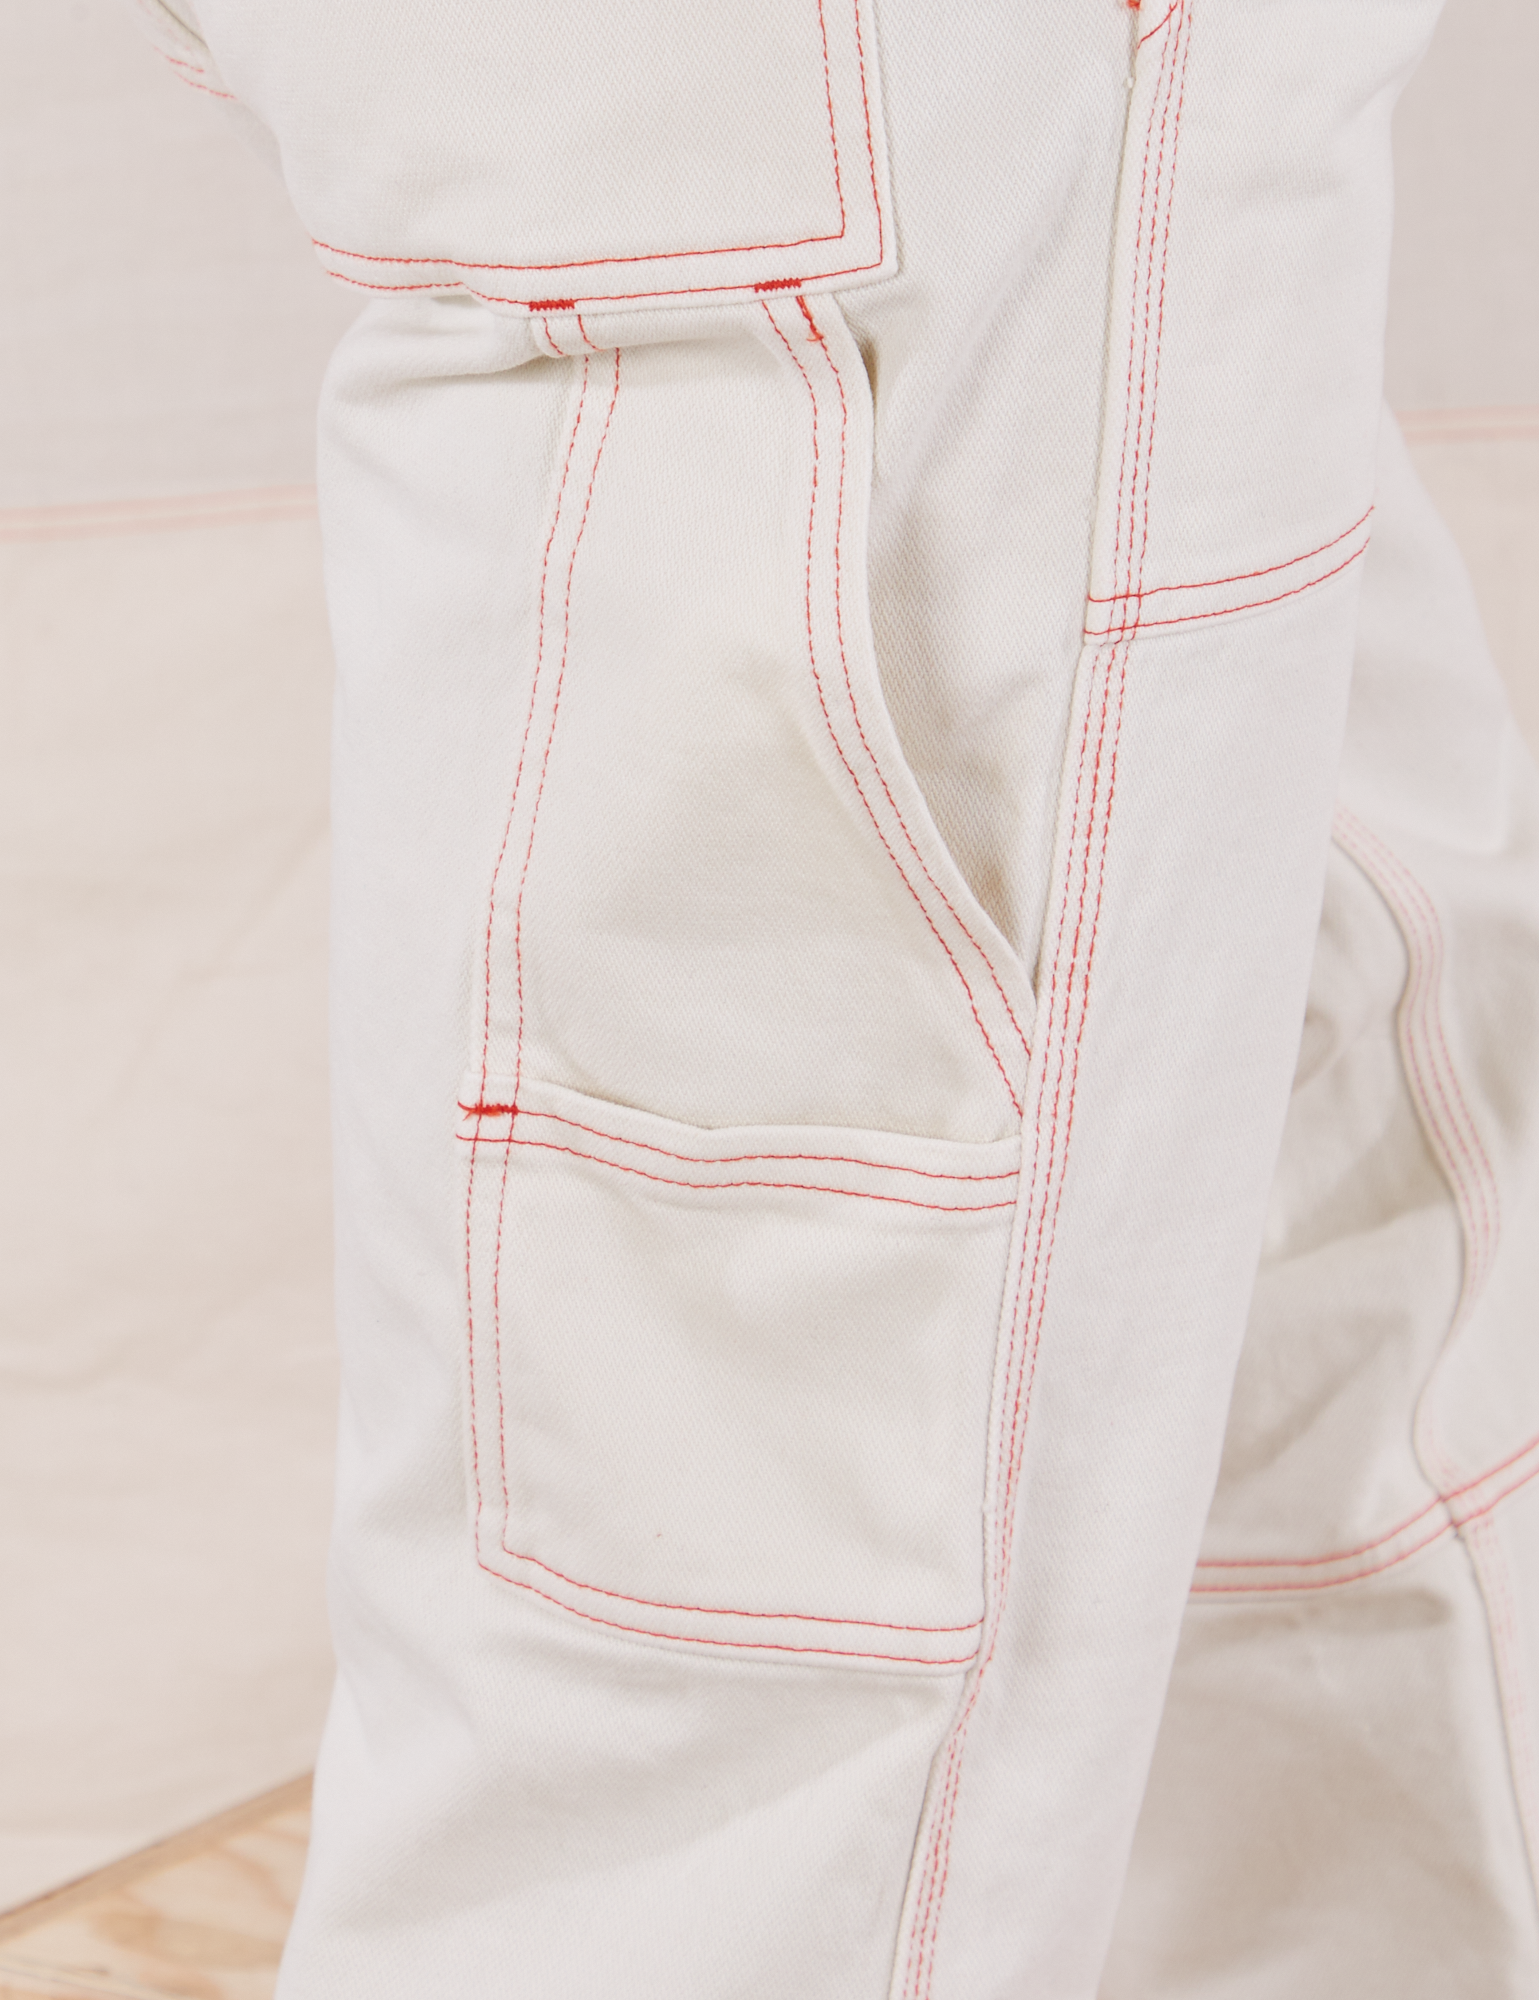 Carpenter Jeans in Vintage Tee Off-White pant leg close up of contrast orange topstitching. 